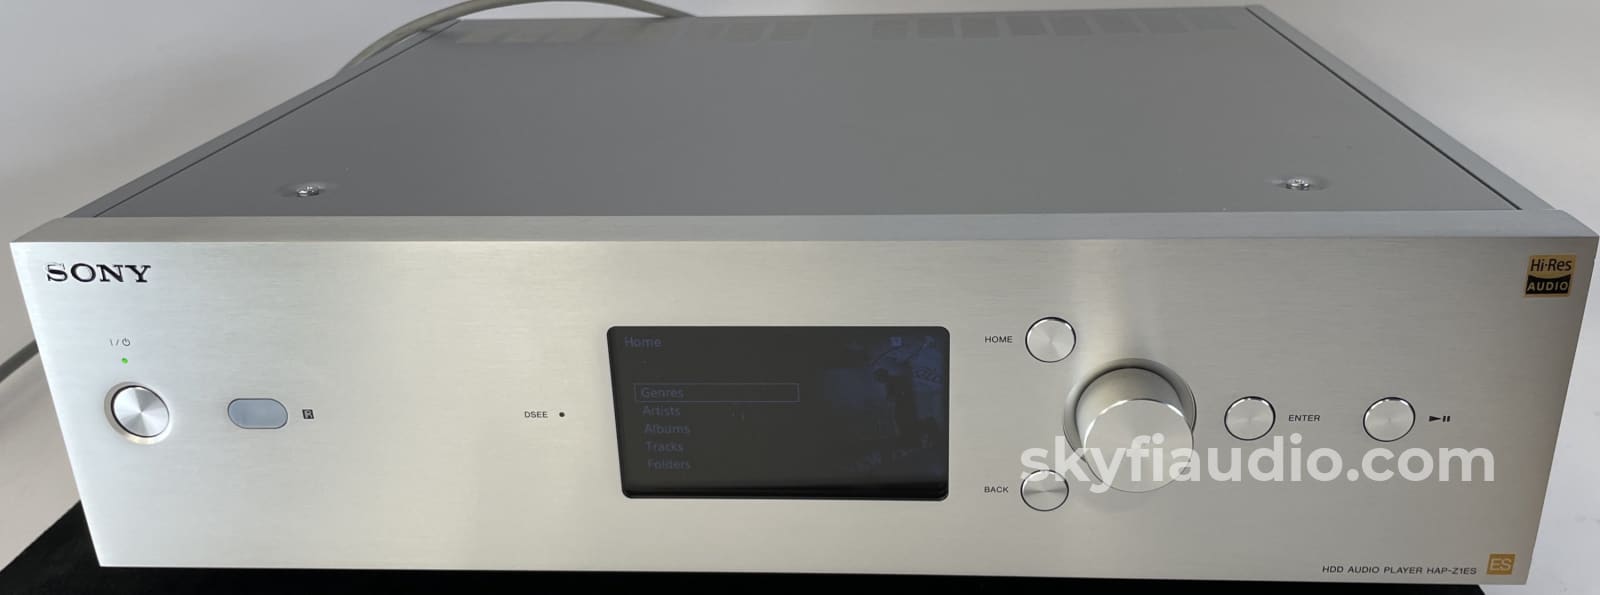 Sony HAP-Z1ES High-Resolution Audio HDD & Network Player - Loaded with